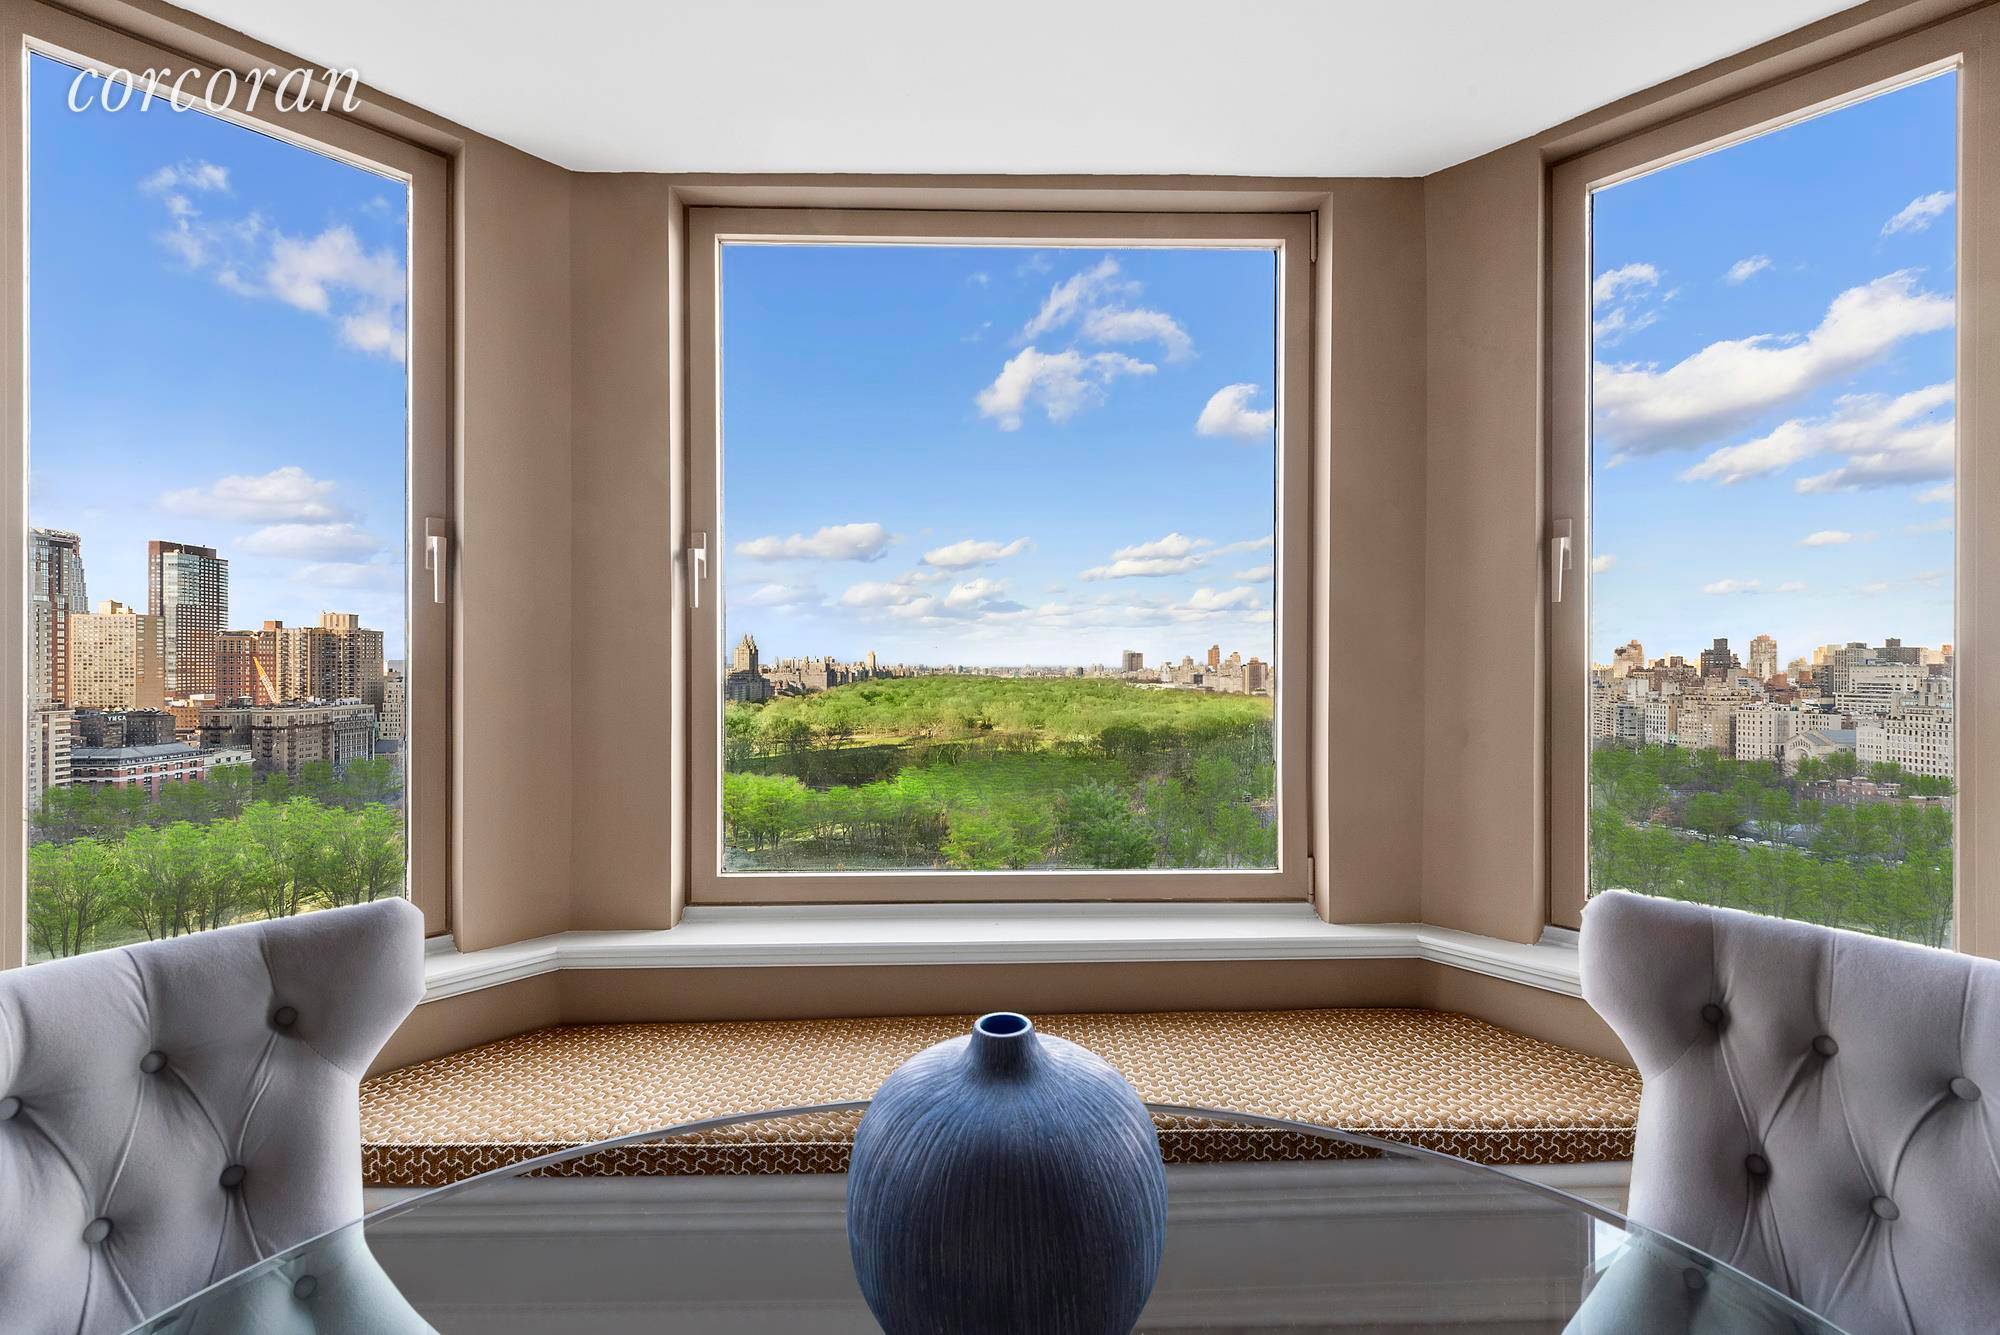 Experience full Central Park views from every window in this one bedroom condominium, apartment 2403, at New York's famed Essex House, 106 Central Park South !